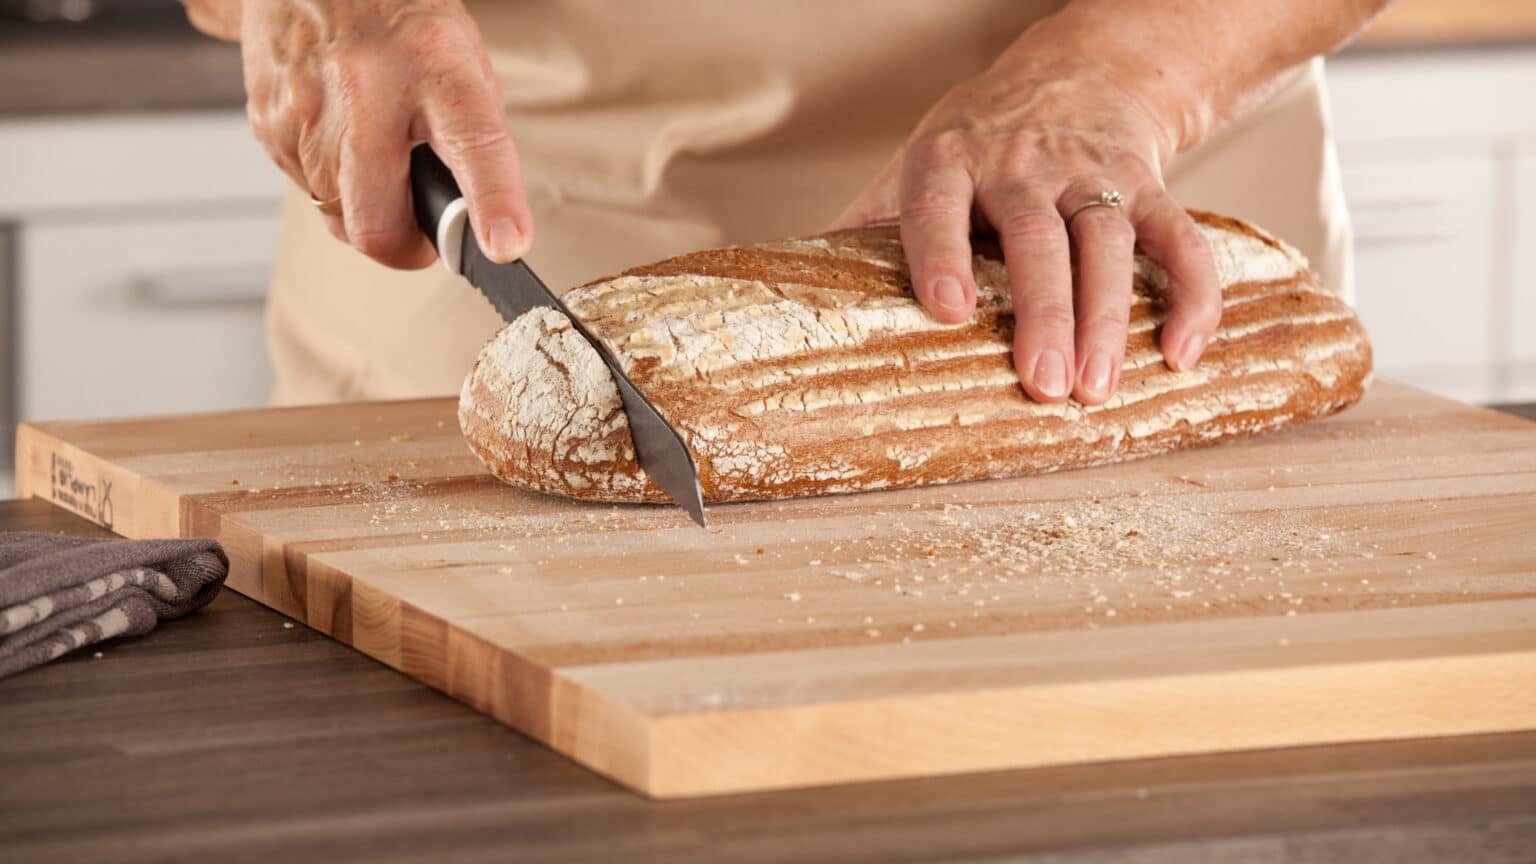 Types of Bread Knives and Criteria for Choosing the Best One